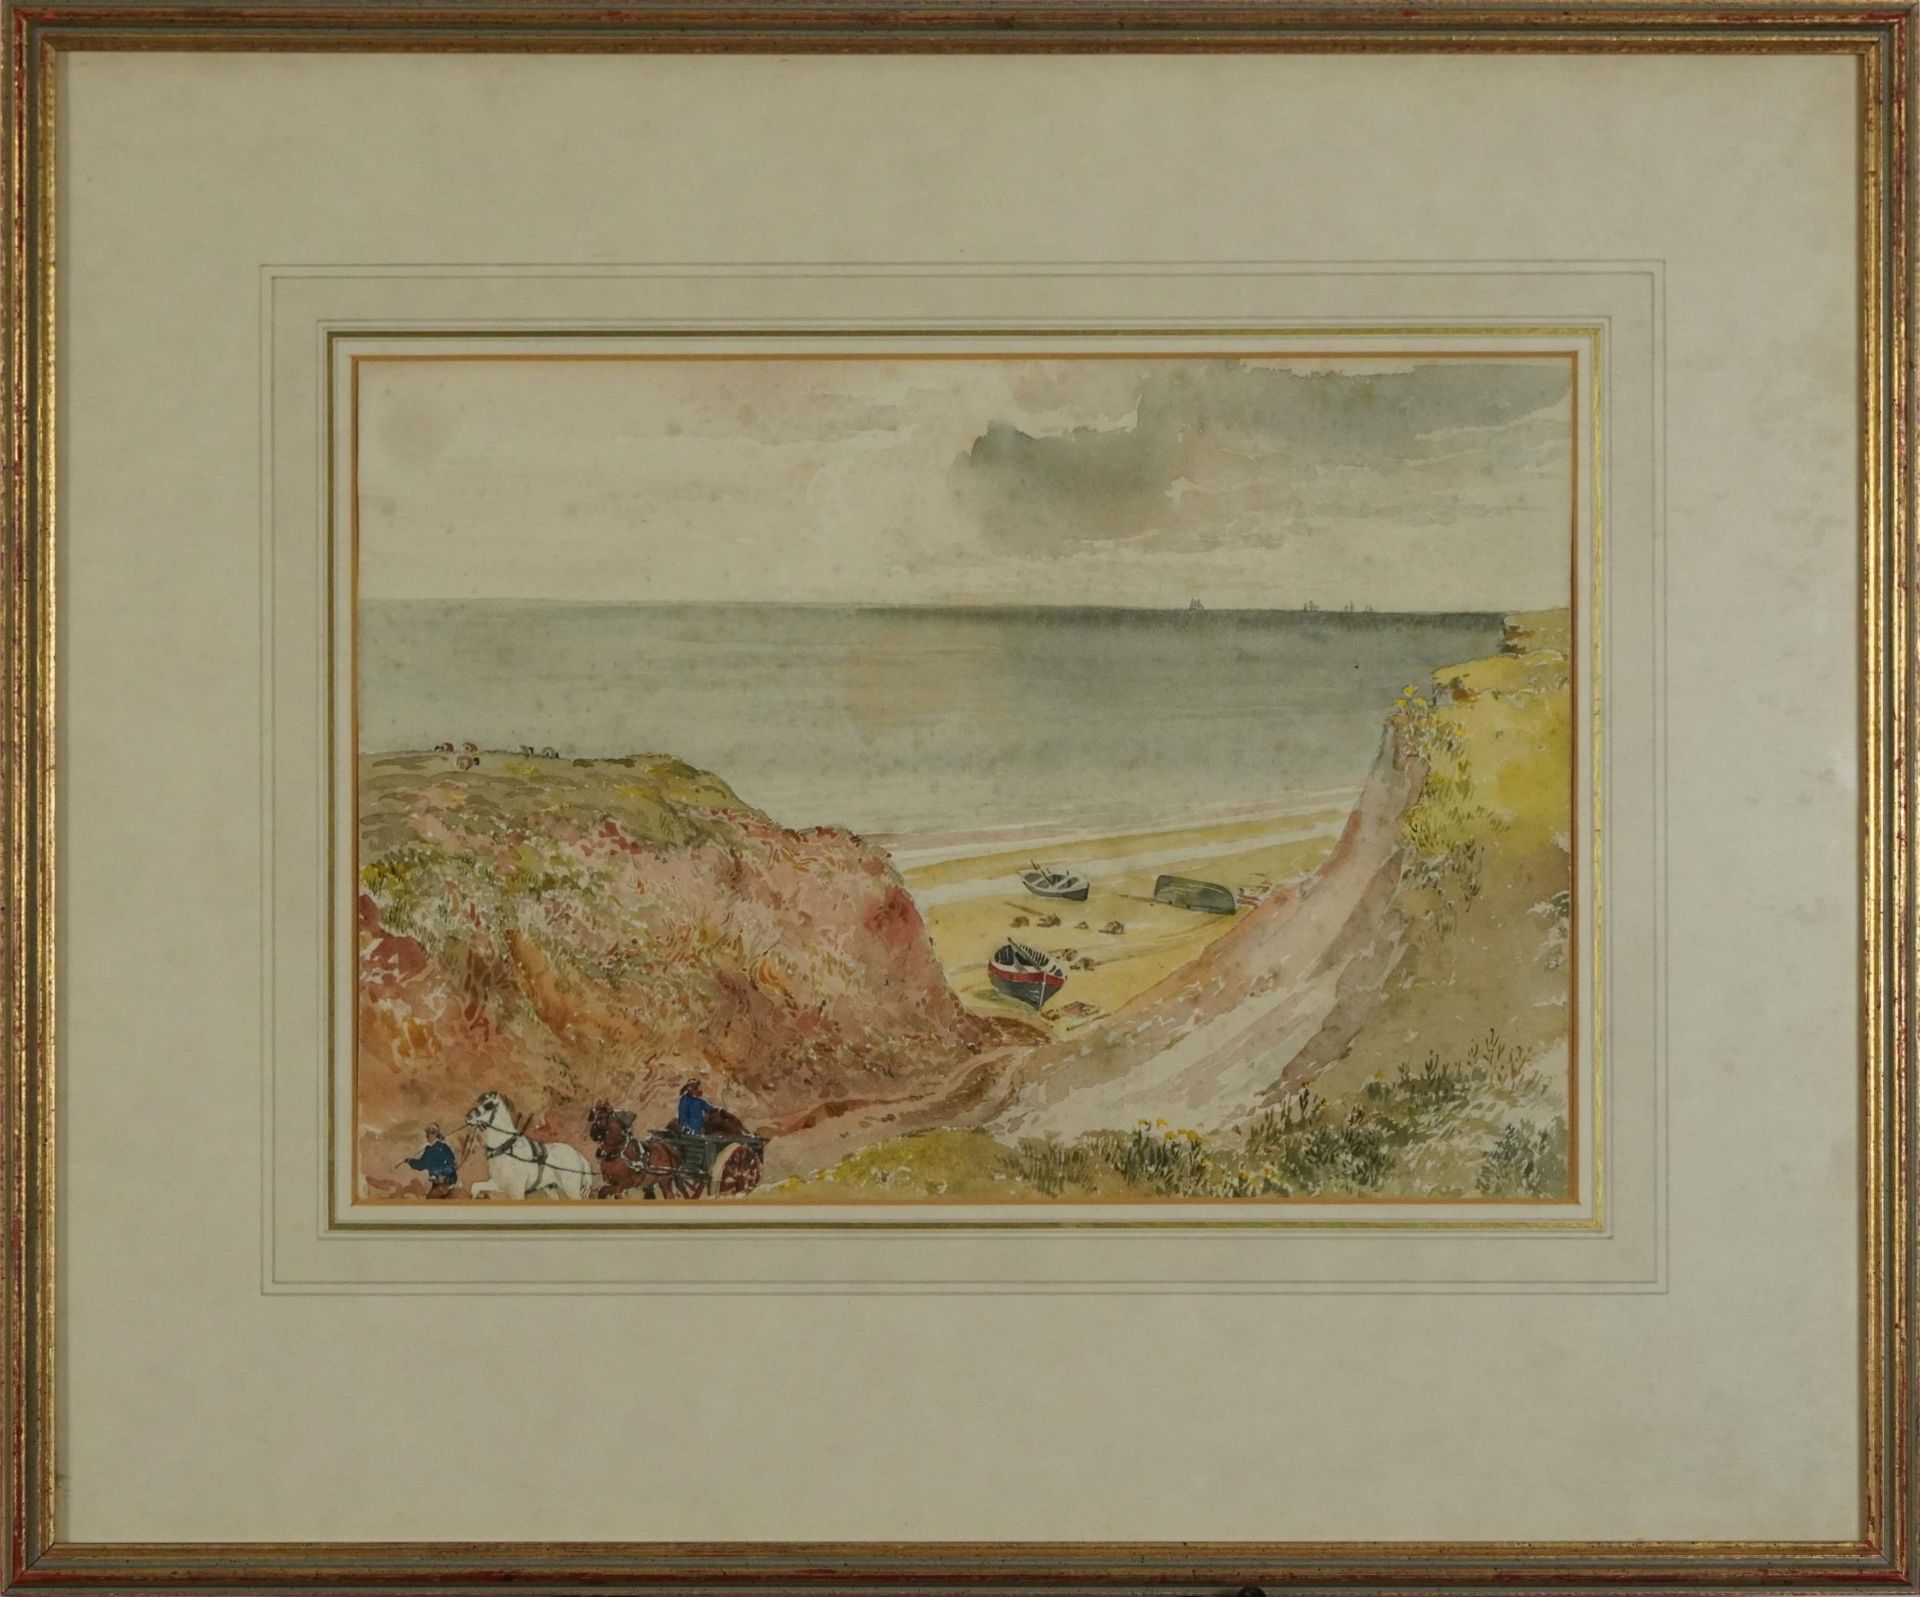 Samuel Lucas - Smugglers at Cromer, Norfolk, 19th century watercolour, The Fine Arts Society label - Image 2 of 4